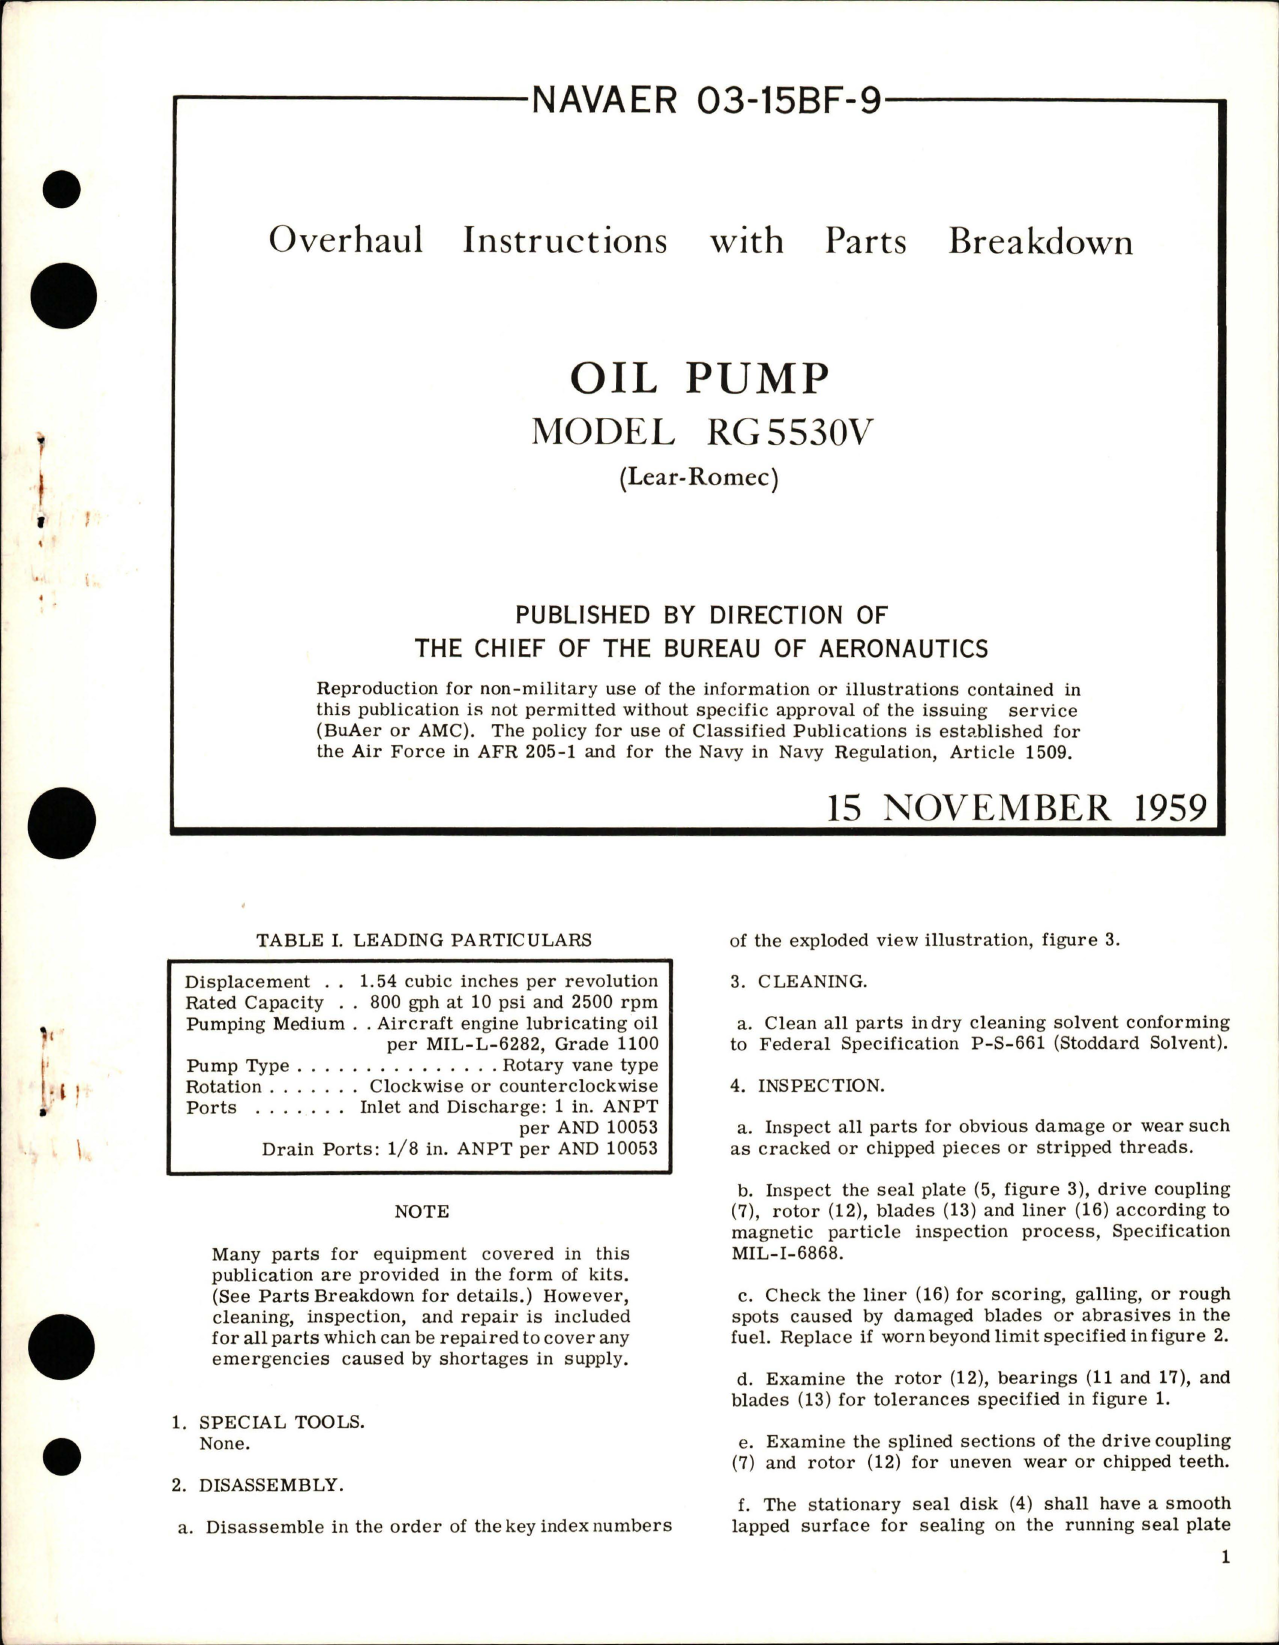 Sample page 1 from AirCorps Library document: Overhaul Instructions with Parts Breakdown for Oil Pump - Model RG5530V